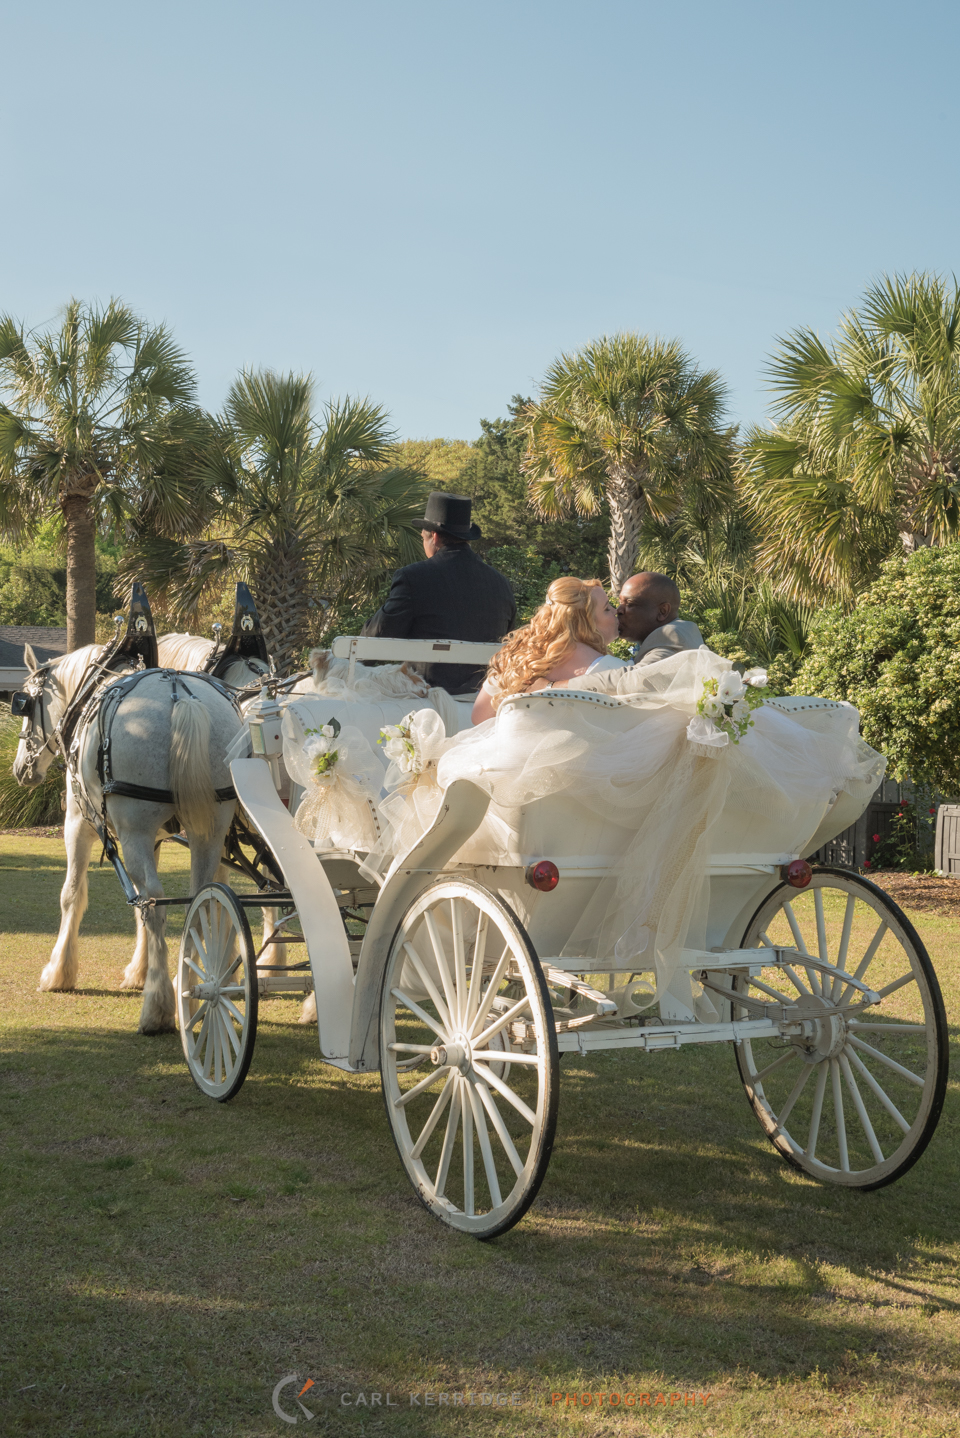 as they exit their ceremony , the bride and groom share a kiss on their Wedding Carriage Ride